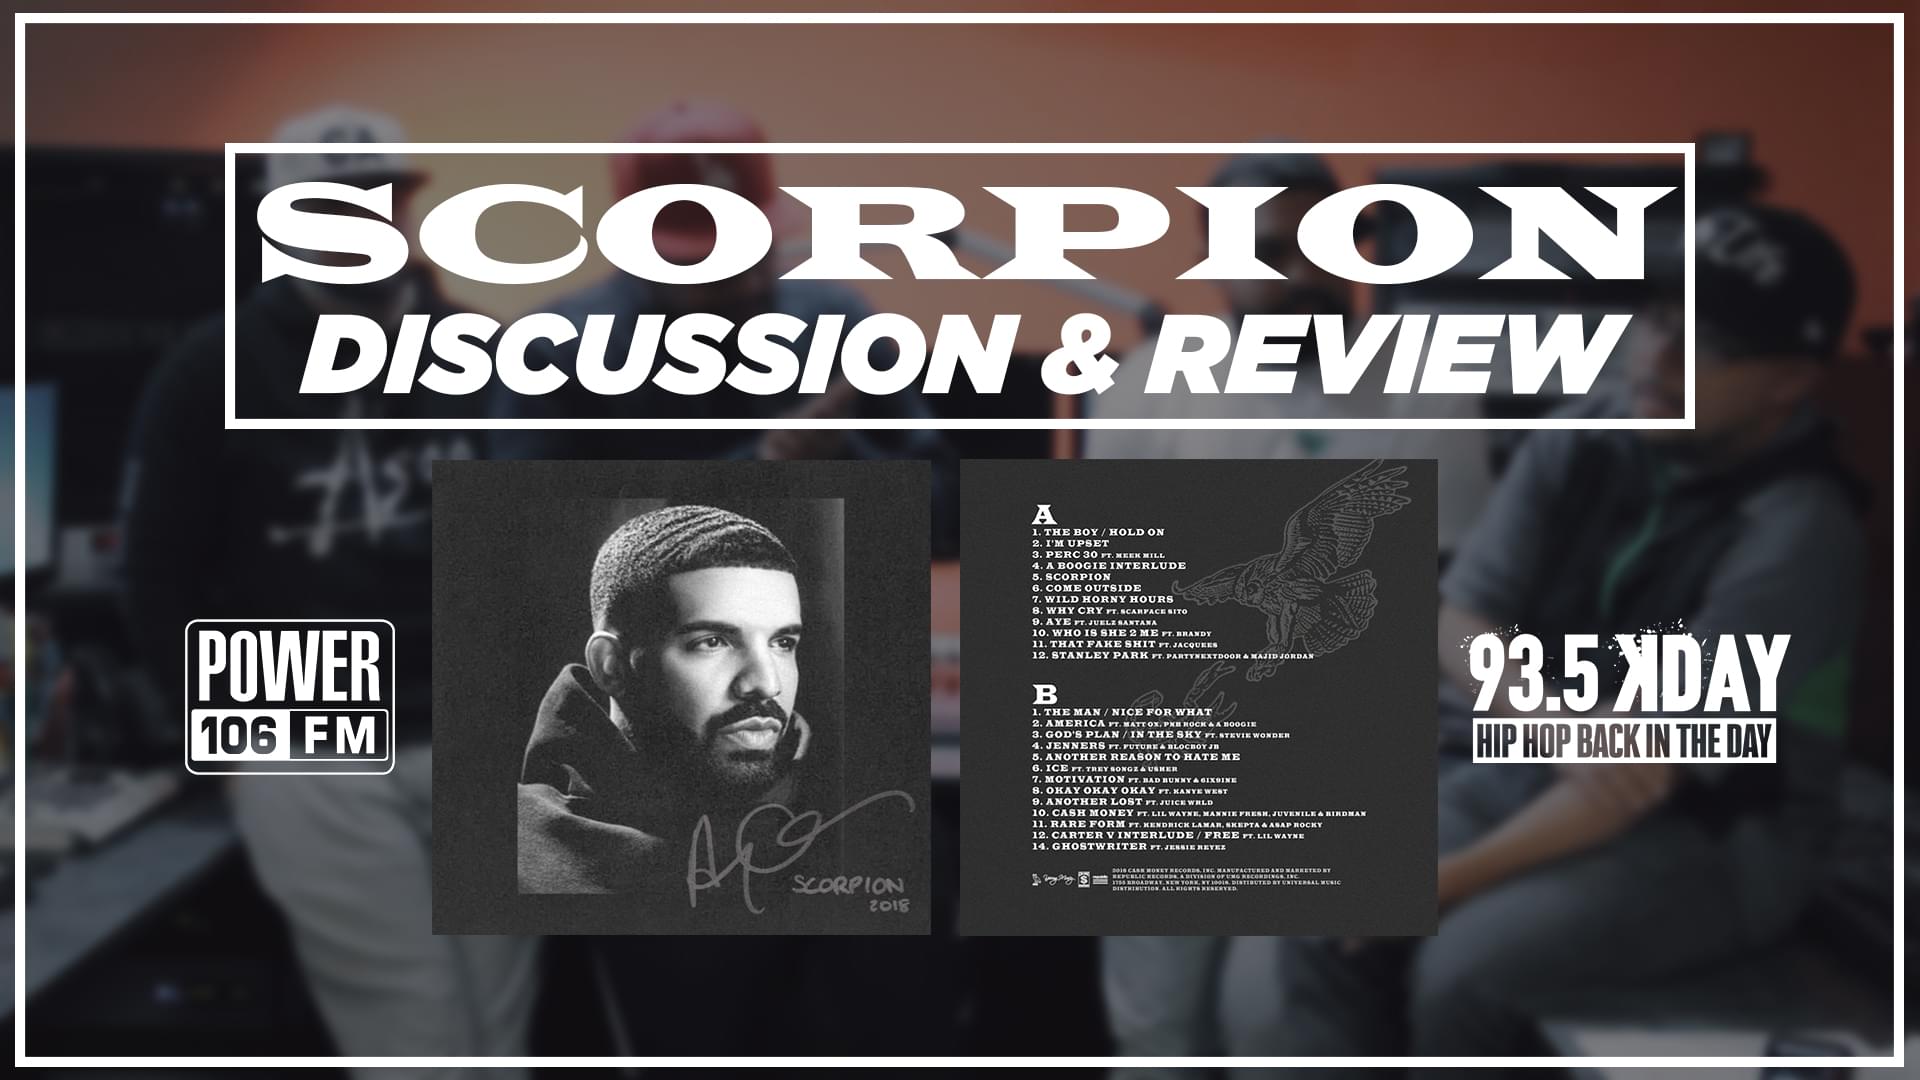 ‘Scorpion’ Album Review, First Impressions & Discussion [WATCH]